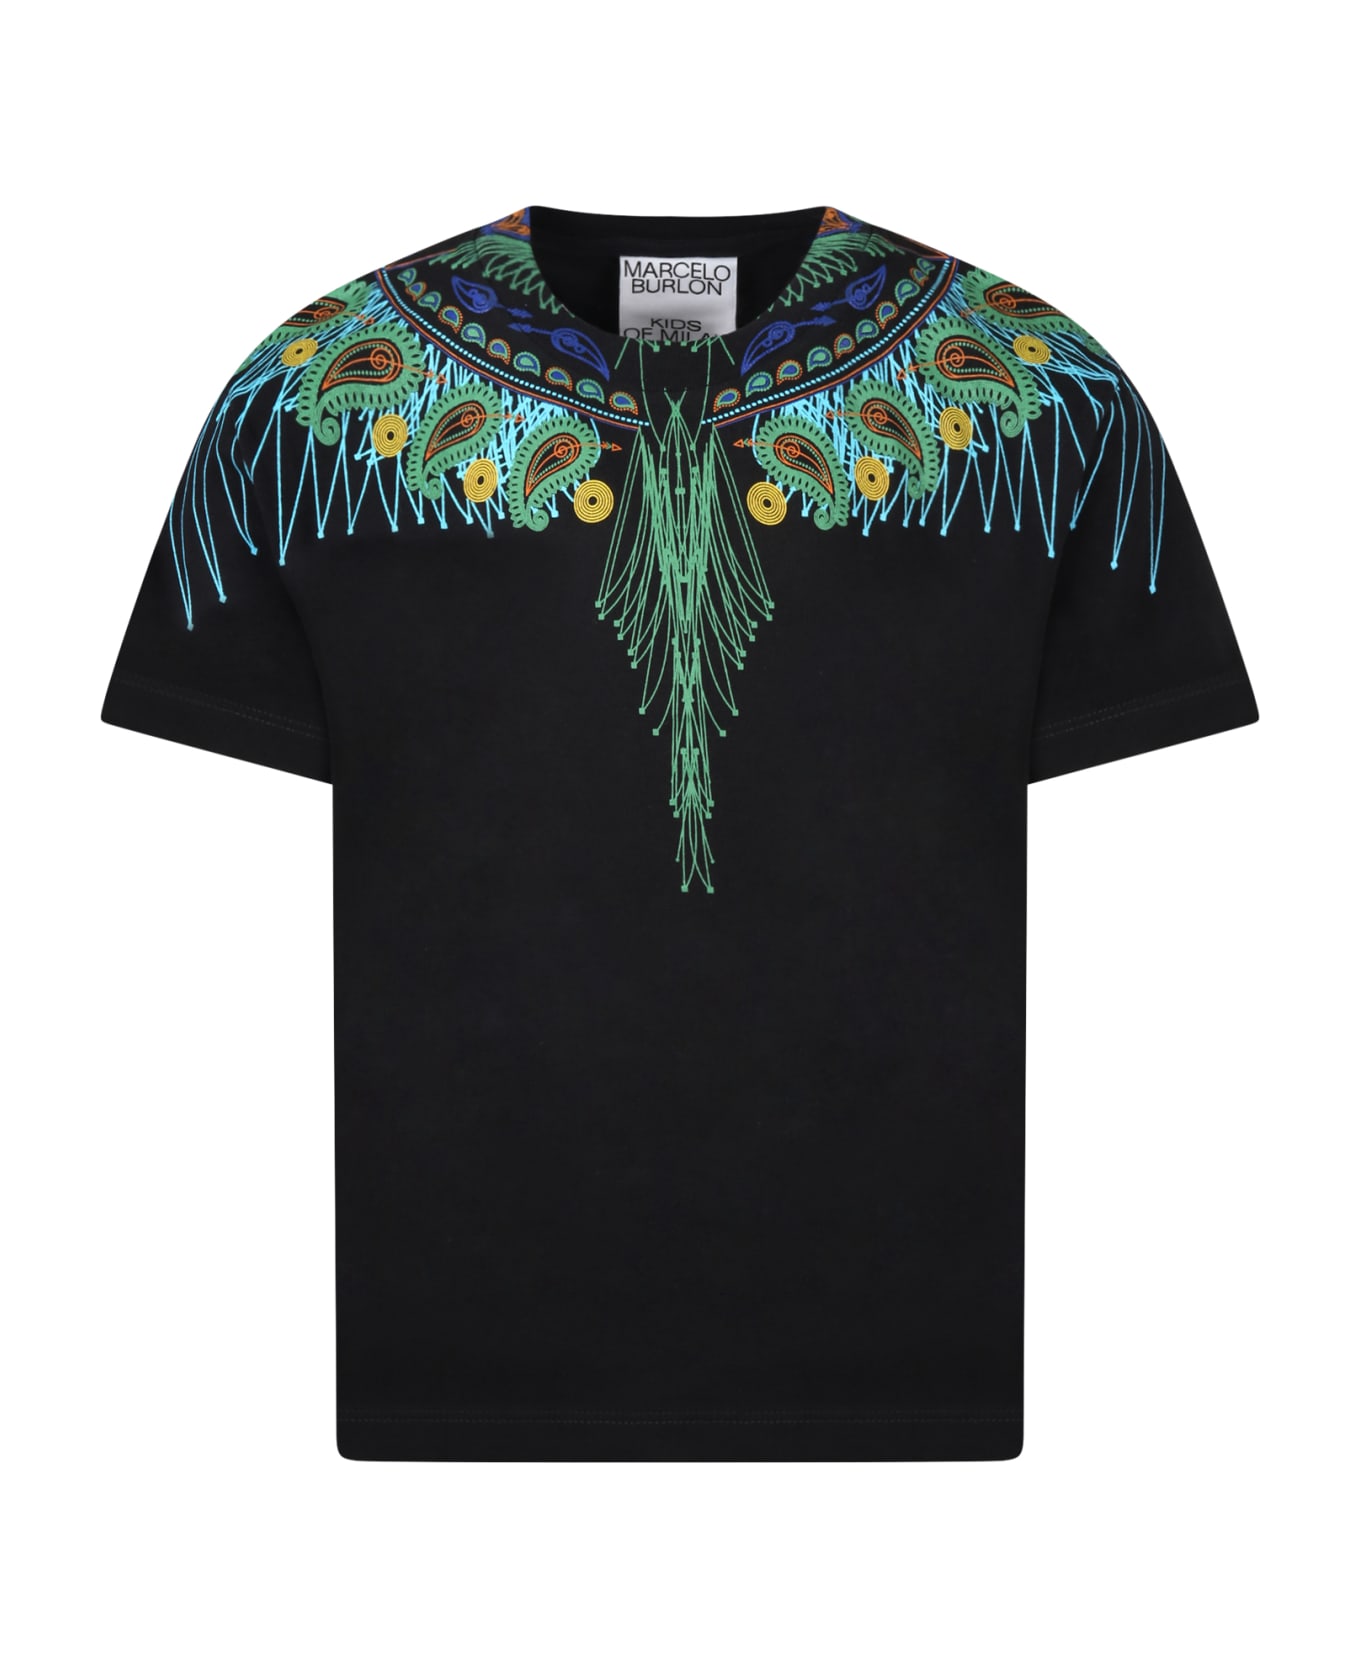 Marcelo Burlon Black T-shirt For Kids With Iconic Wings - Black